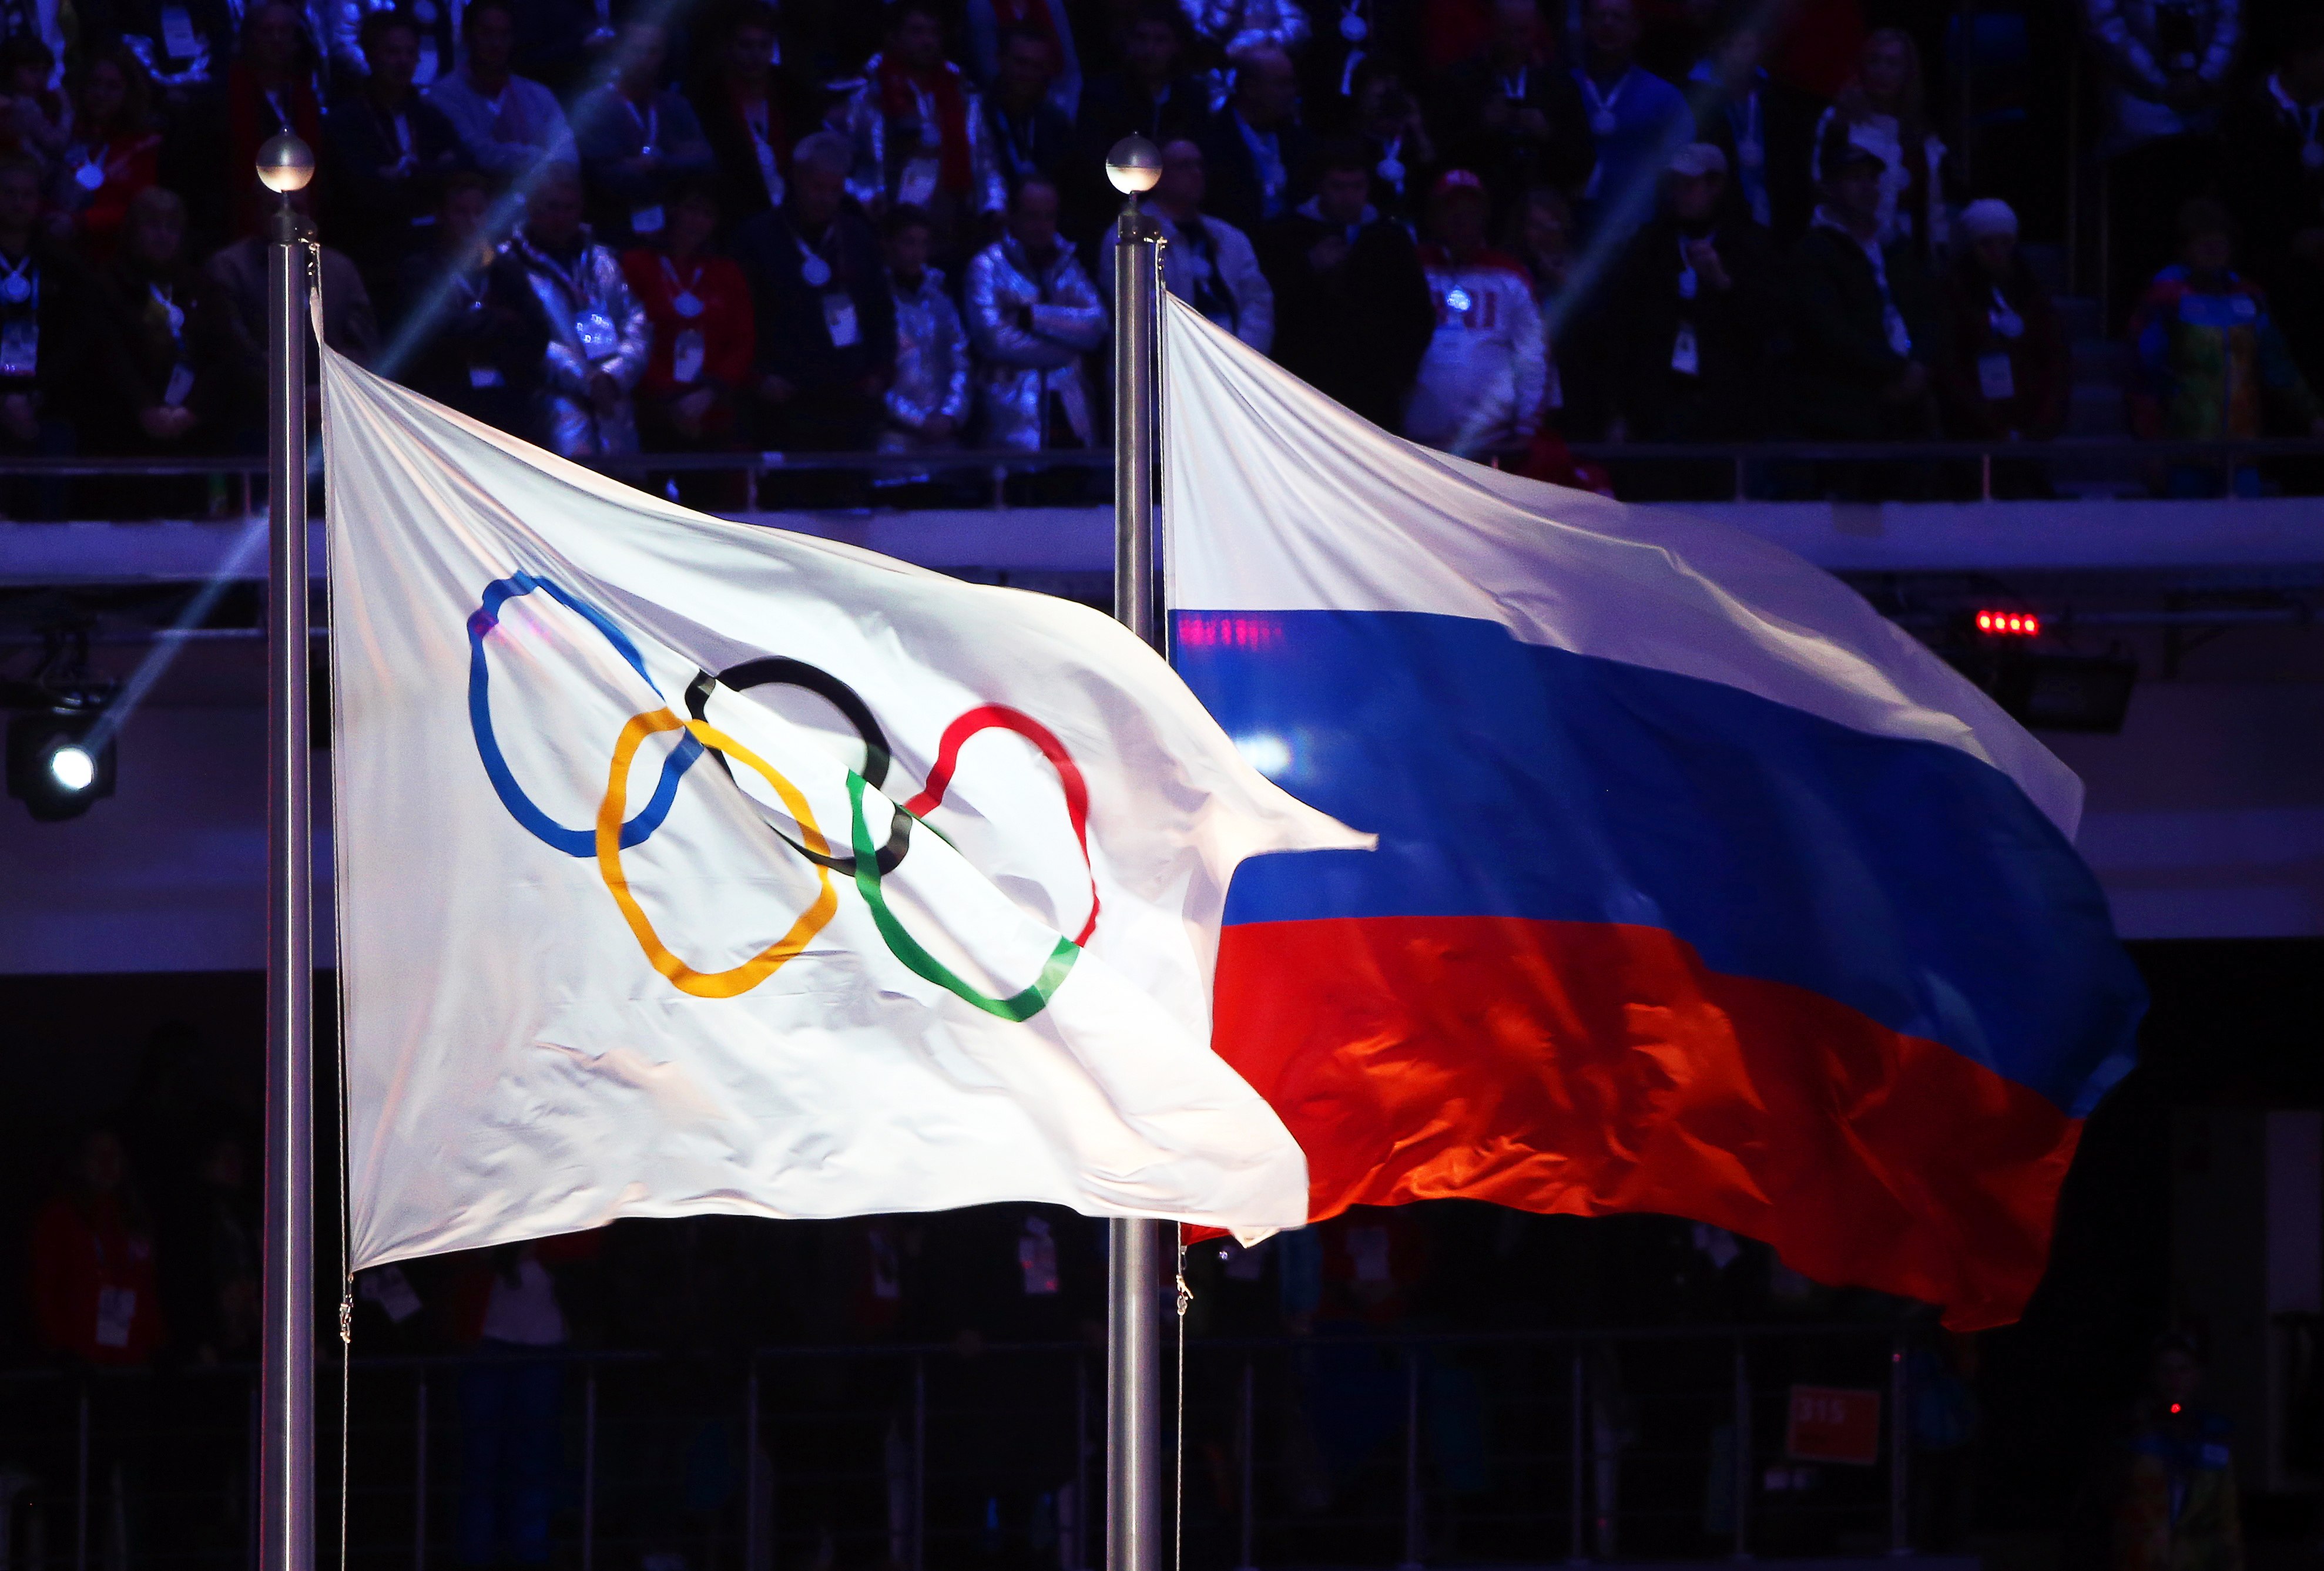 The Olympic flag (left) and Russian flag on display during the closing ceremony of the Sochi 2014 Olympic Games. Photo: EPA-EFE